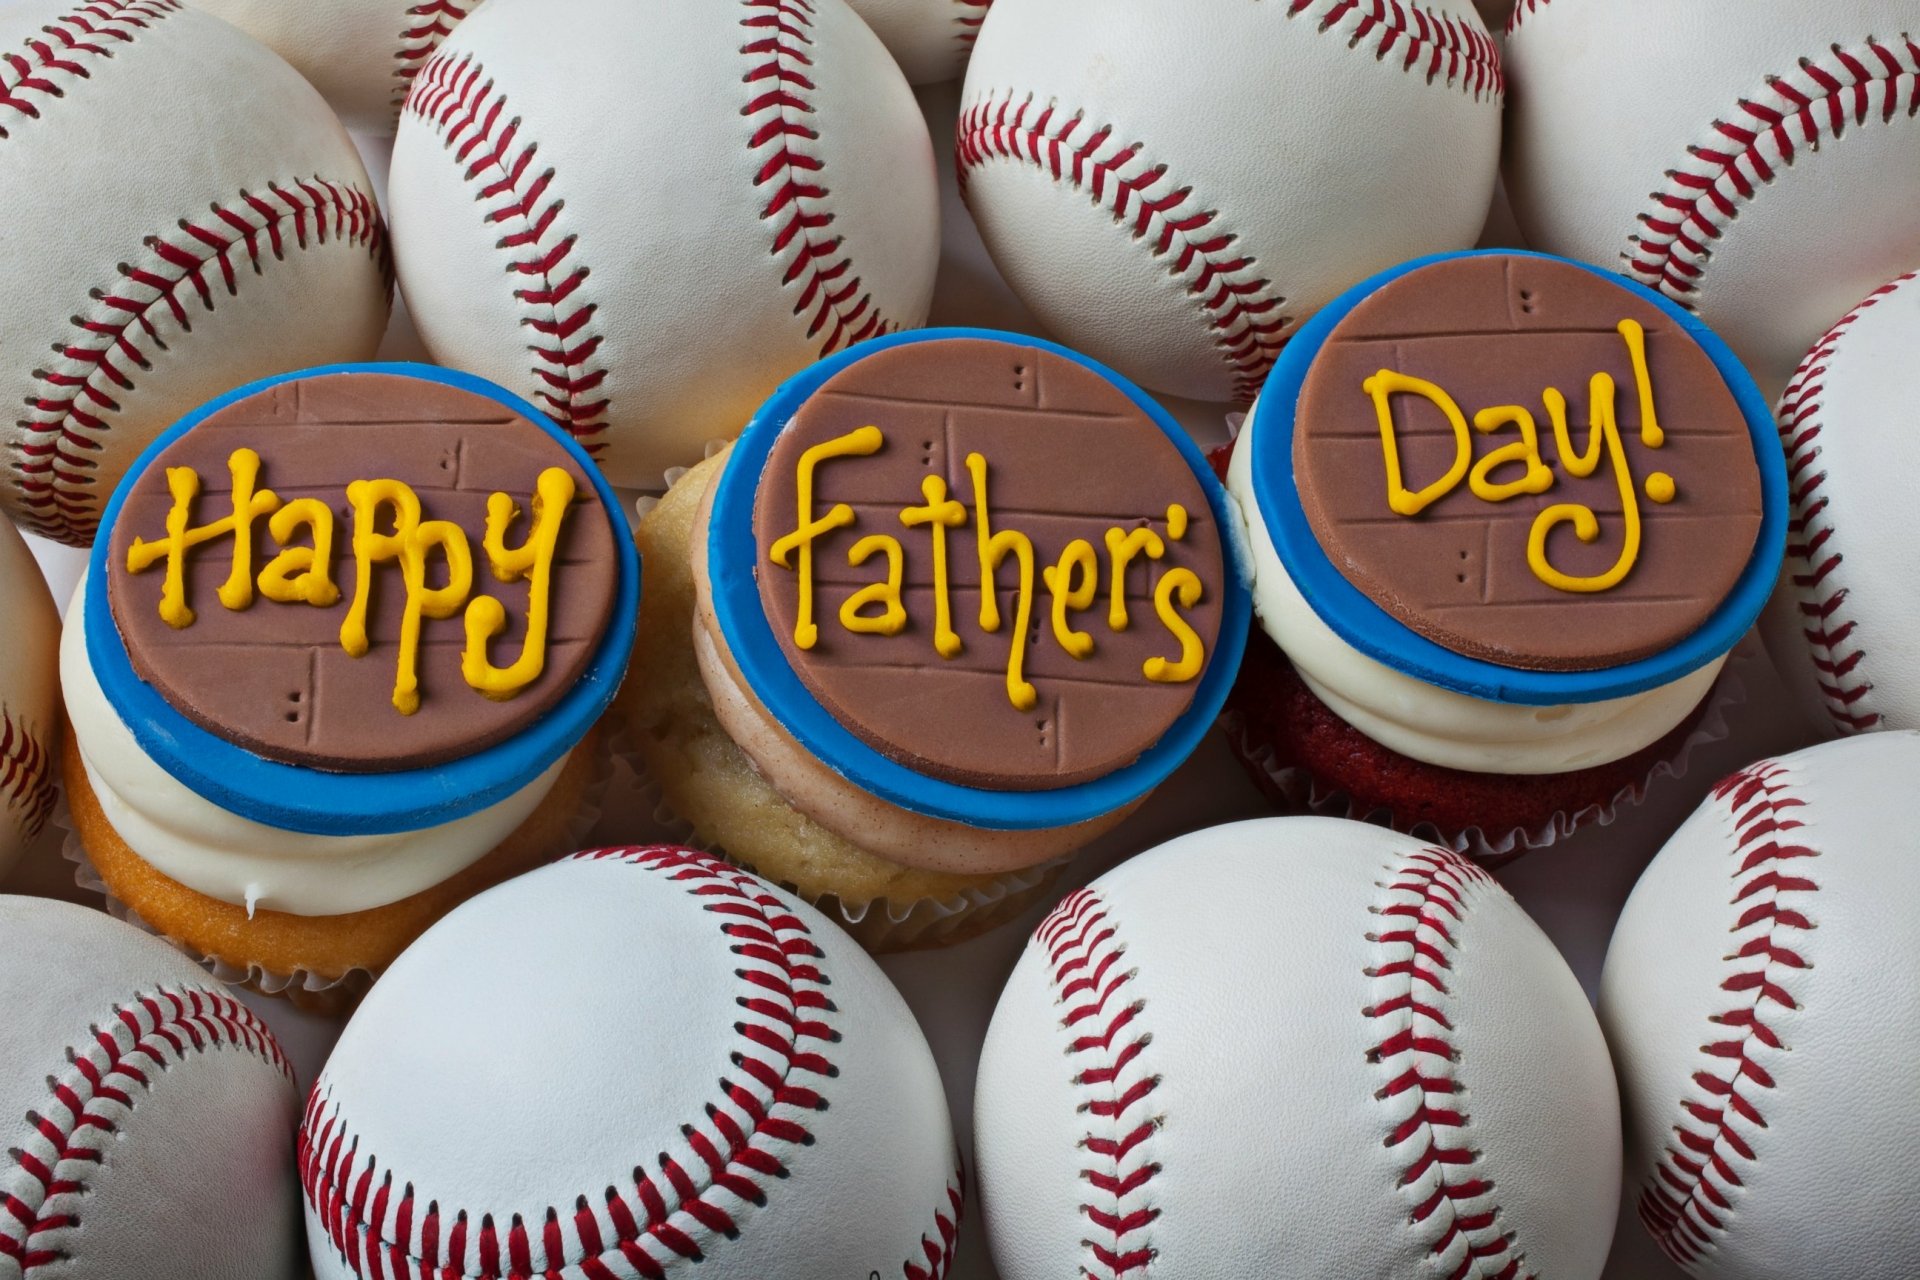 2592x1728 Happy Father's Day Cup Cakes Wallpaper Background Image....